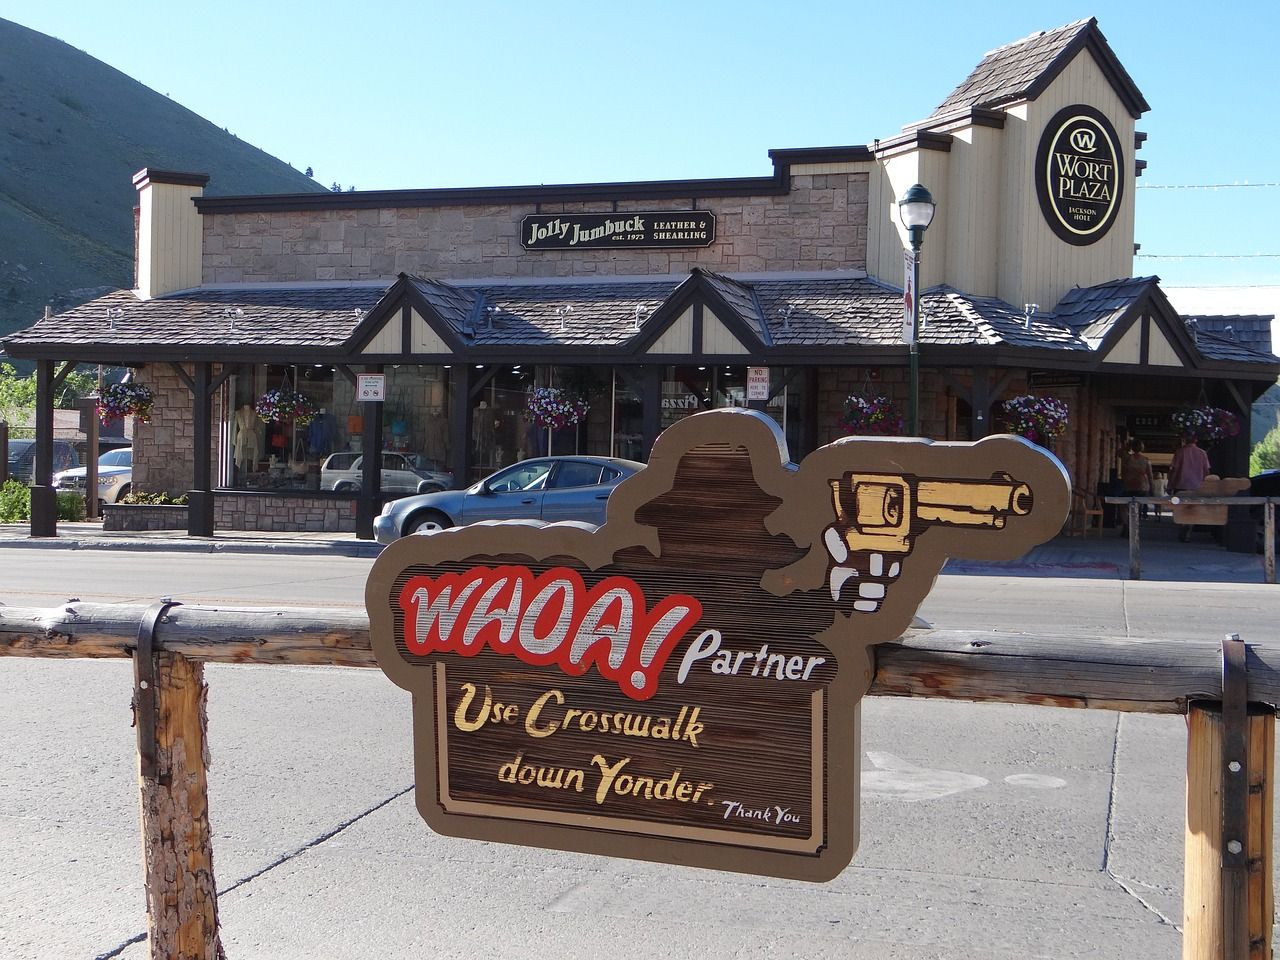 A wooden street sign in front of a restaurant in Jackson, Wyoming